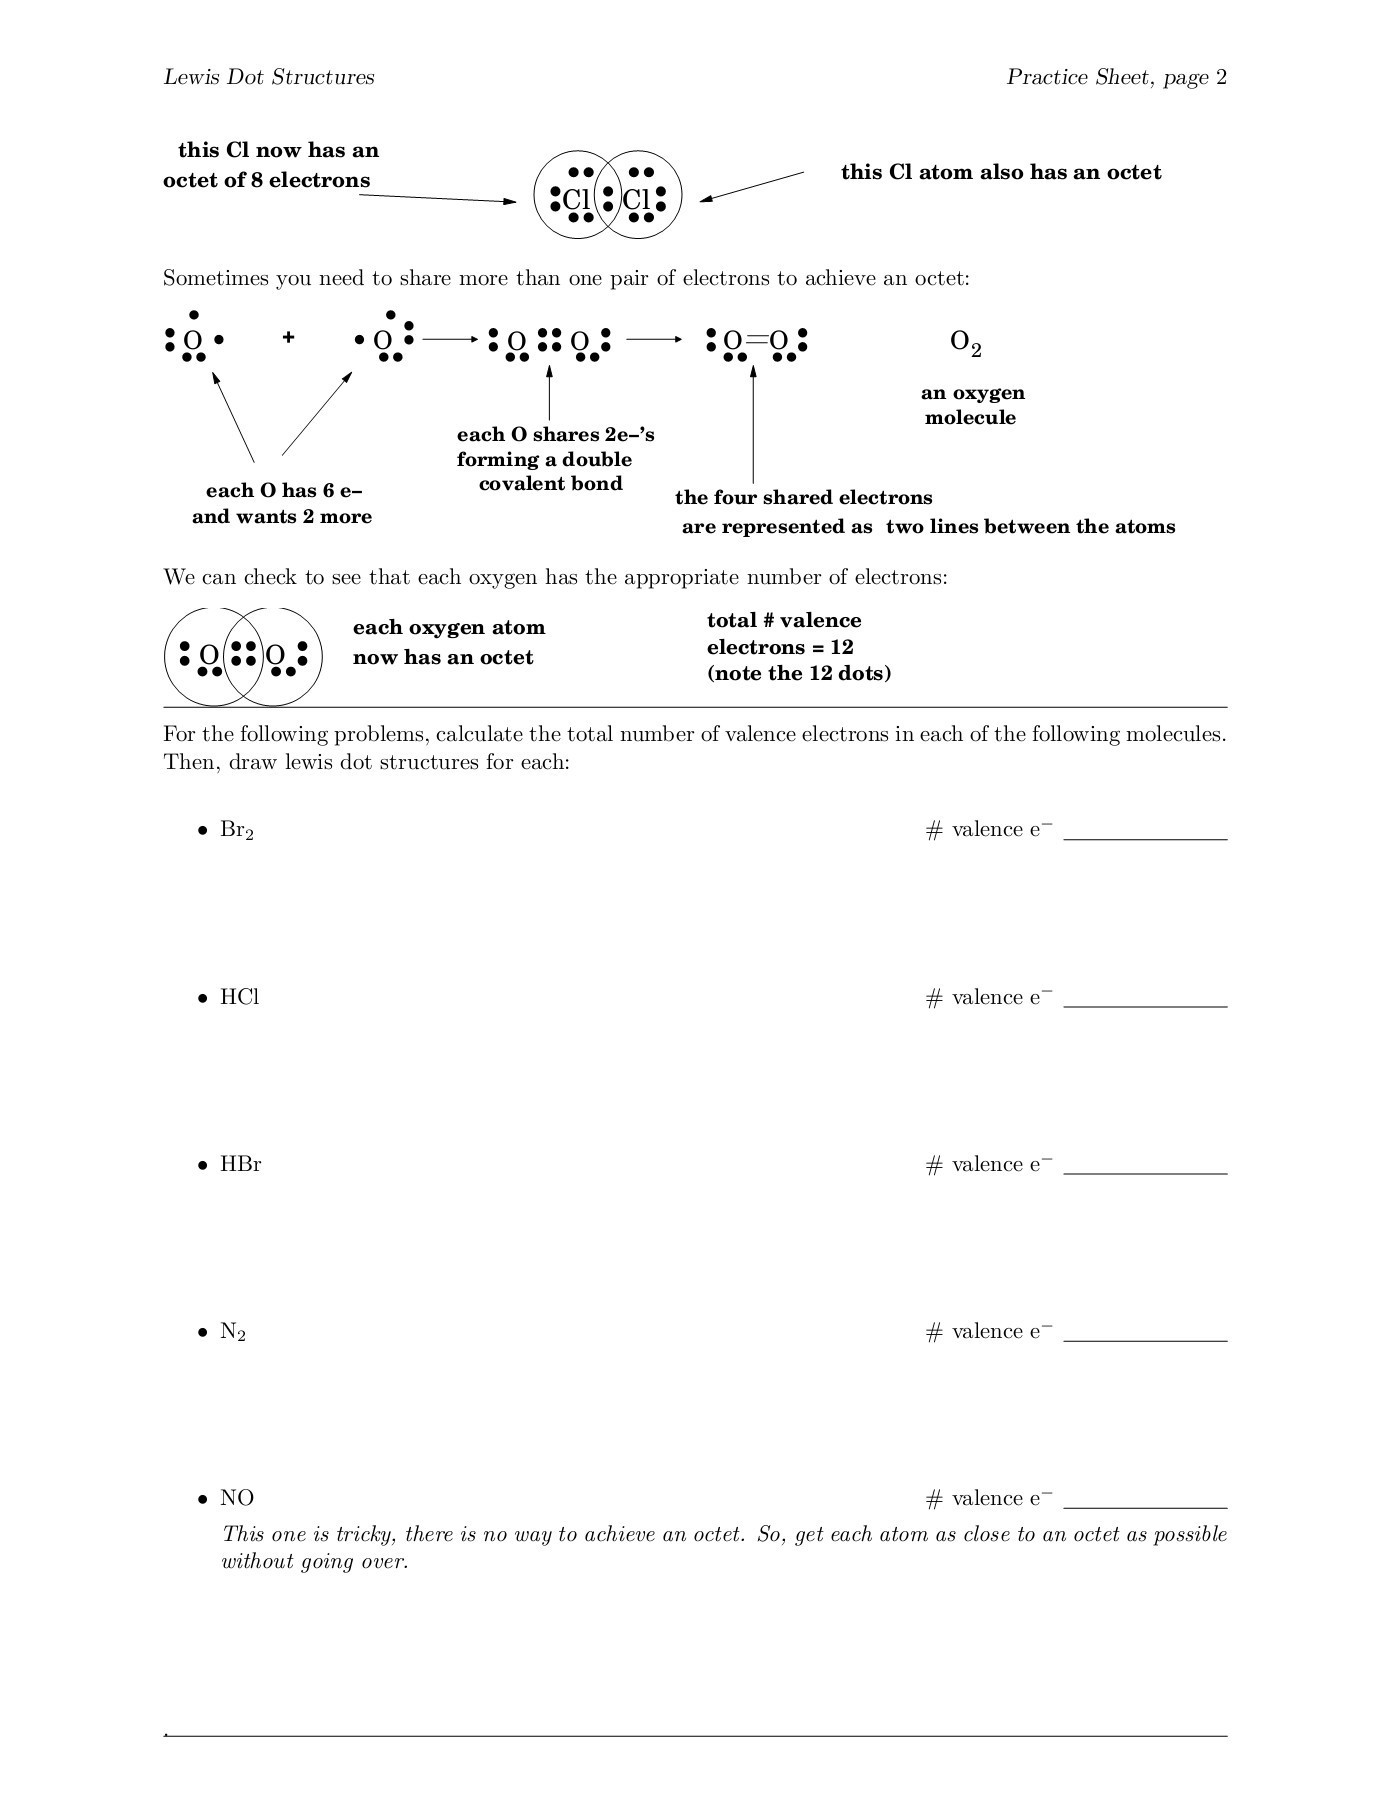 Lewis Dot Structure Practice Worksheet Electron Dot Lewis Structures Pages 1 4 Text Version